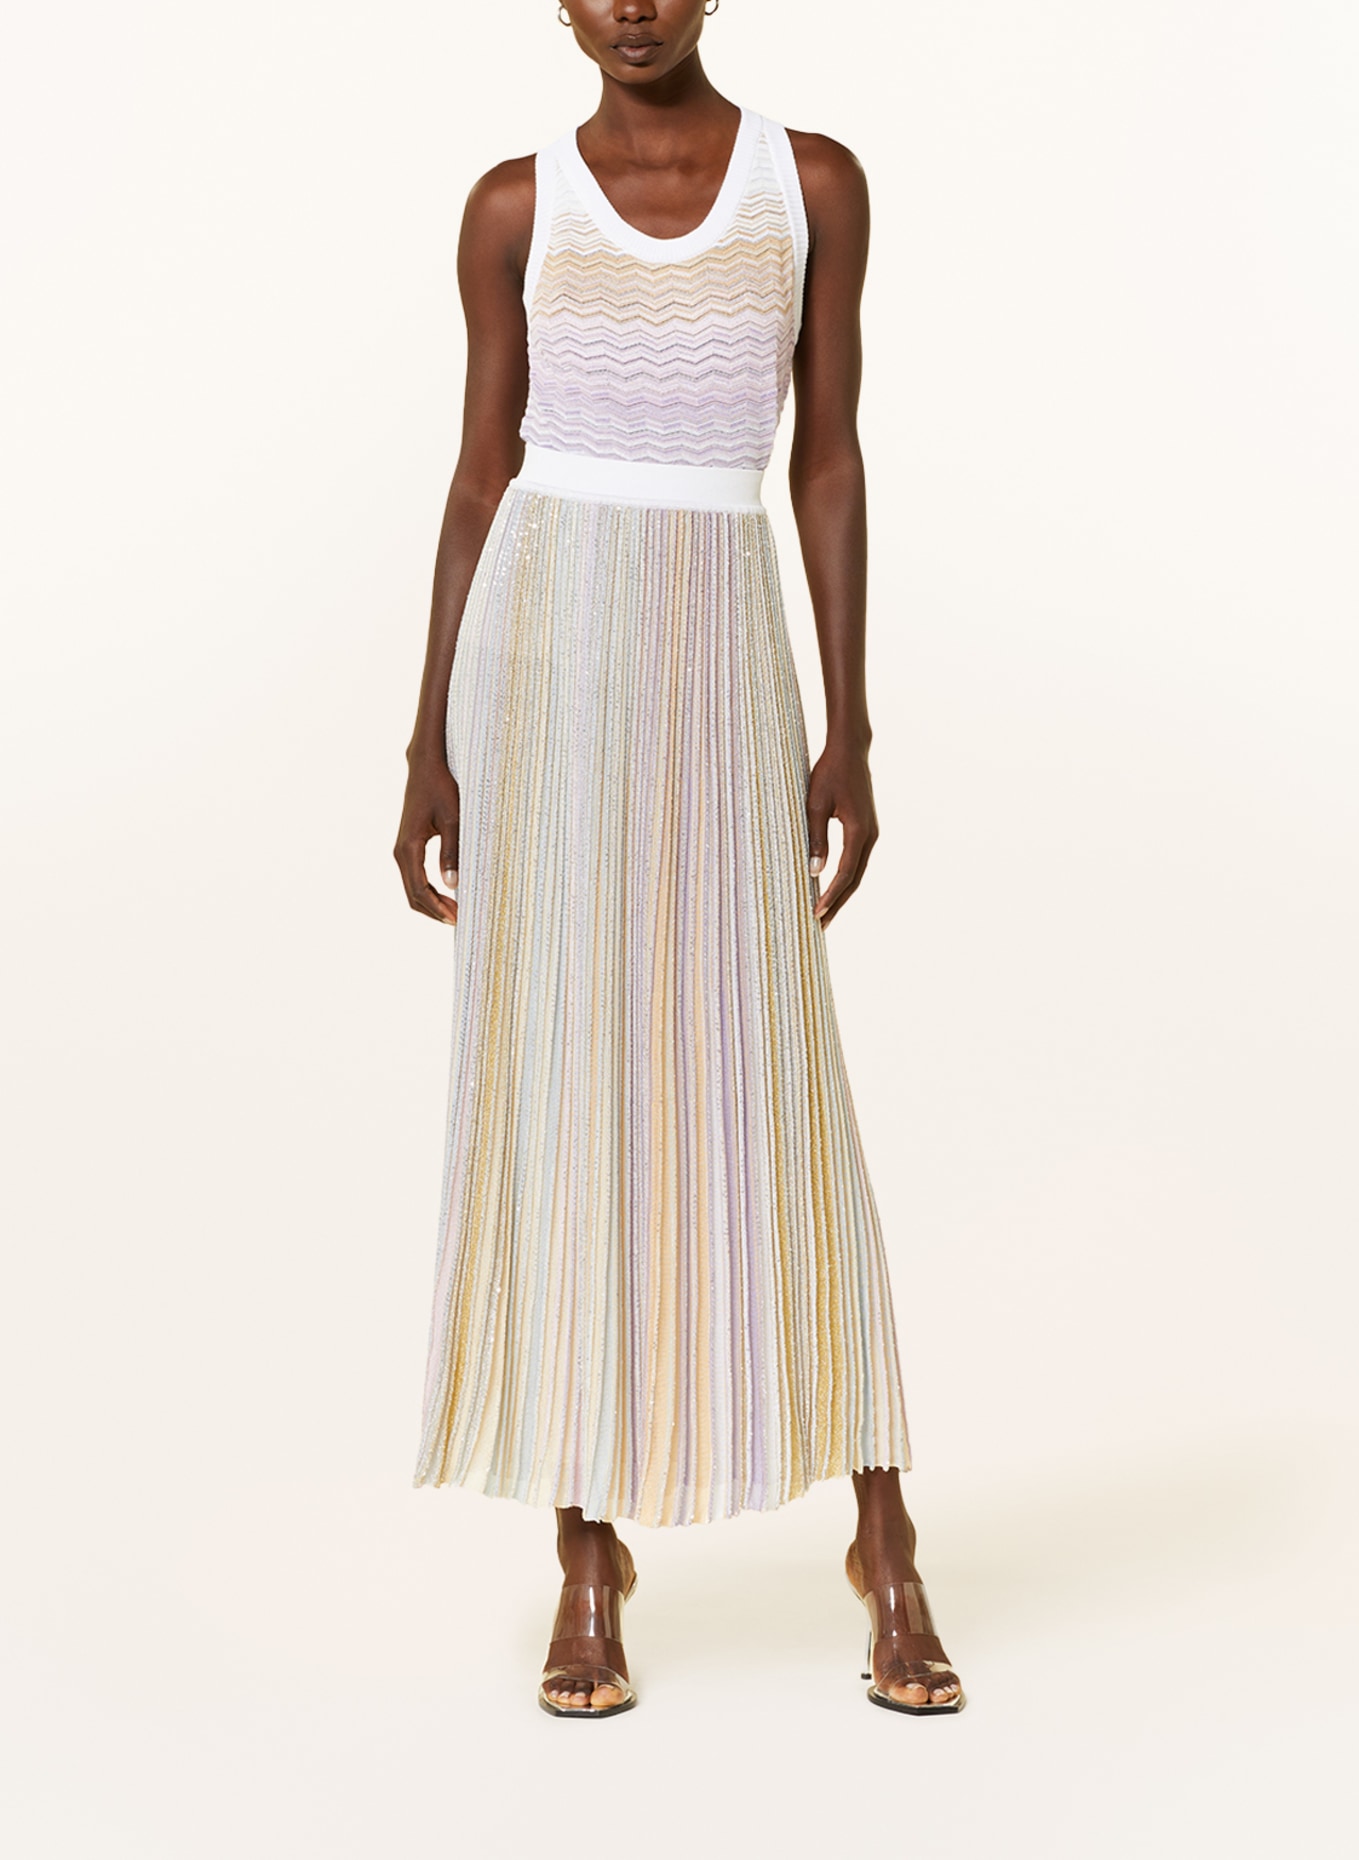 MISSONI Knit skirt with glitter thread and sequins, Color: WHITE/ LIGHT PURPLE/ LIGHT BLUE (Image 2)